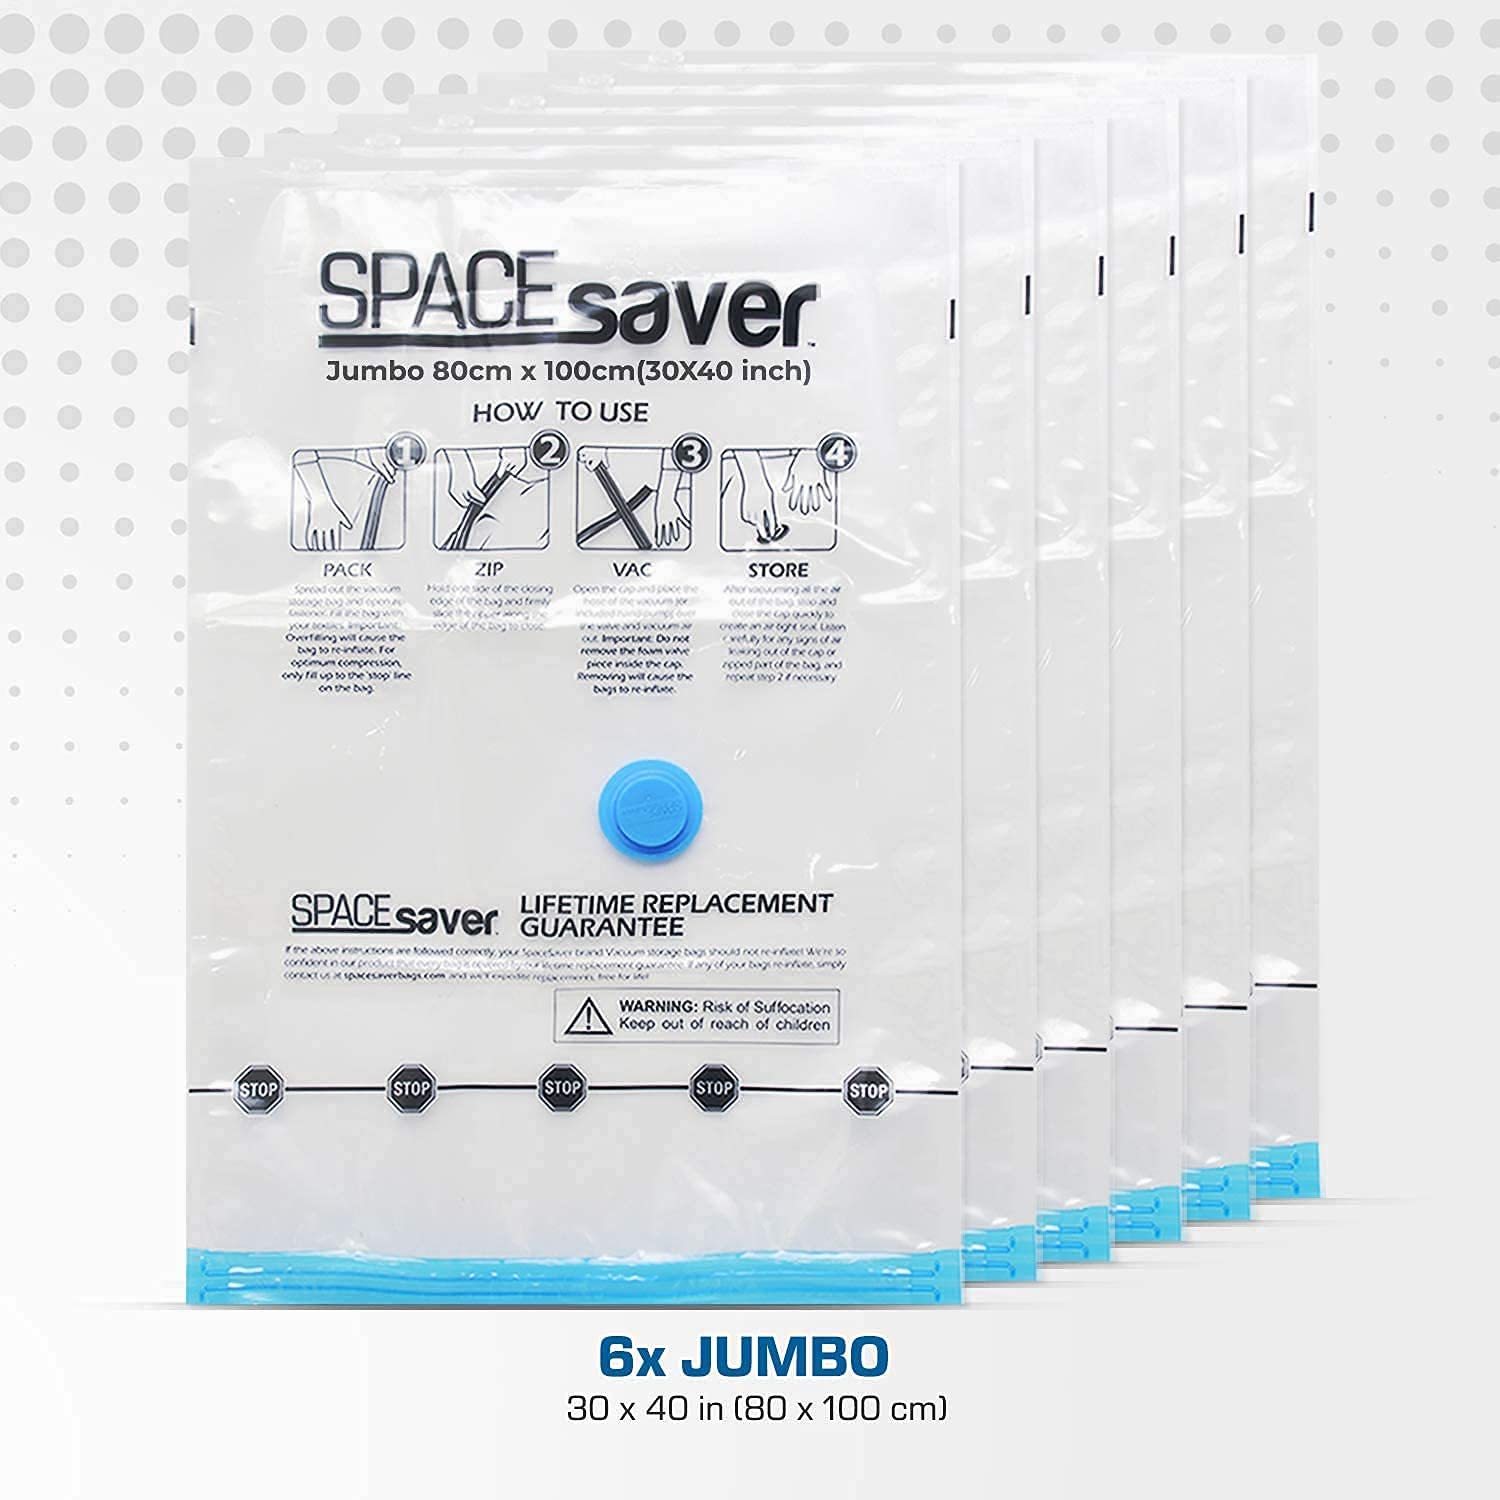 Spacesaver Premium *Jumbo* Vacuum Storage Bags (Works with Any Vacuum Cleaner + Free Hand-Pump for Travel!) Double-Zip Seal and Triple Seal Turbo-Valve for 80% More Compression! - image 3 of 6